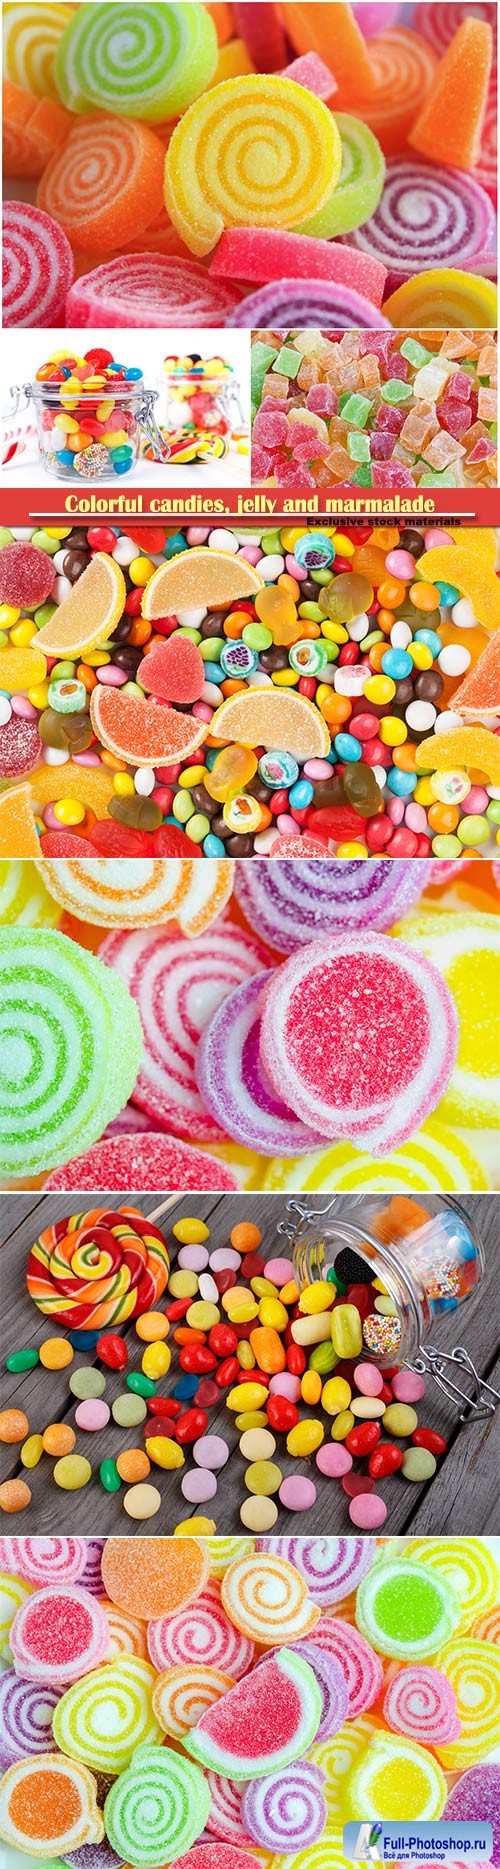 Colorful candies, jelly and marmalade background